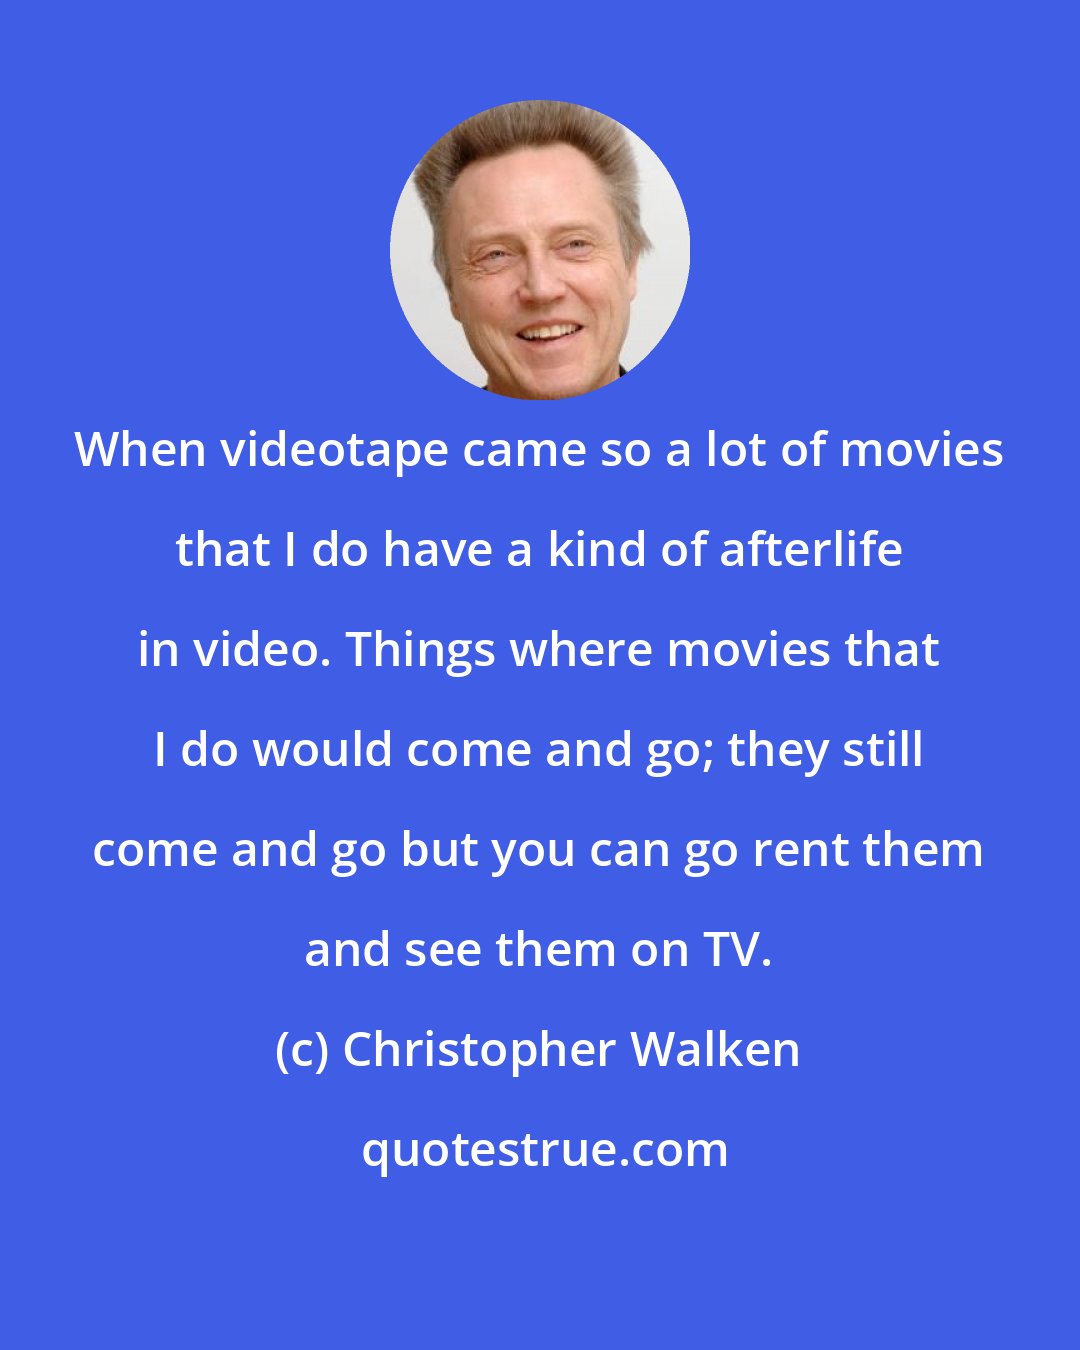 Christopher Walken: When videotape came so a lot of movies that I do have a kind of afterlife in video. Things where movies that I do would come and go; they still come and go but you can go rent them and see them on TV.